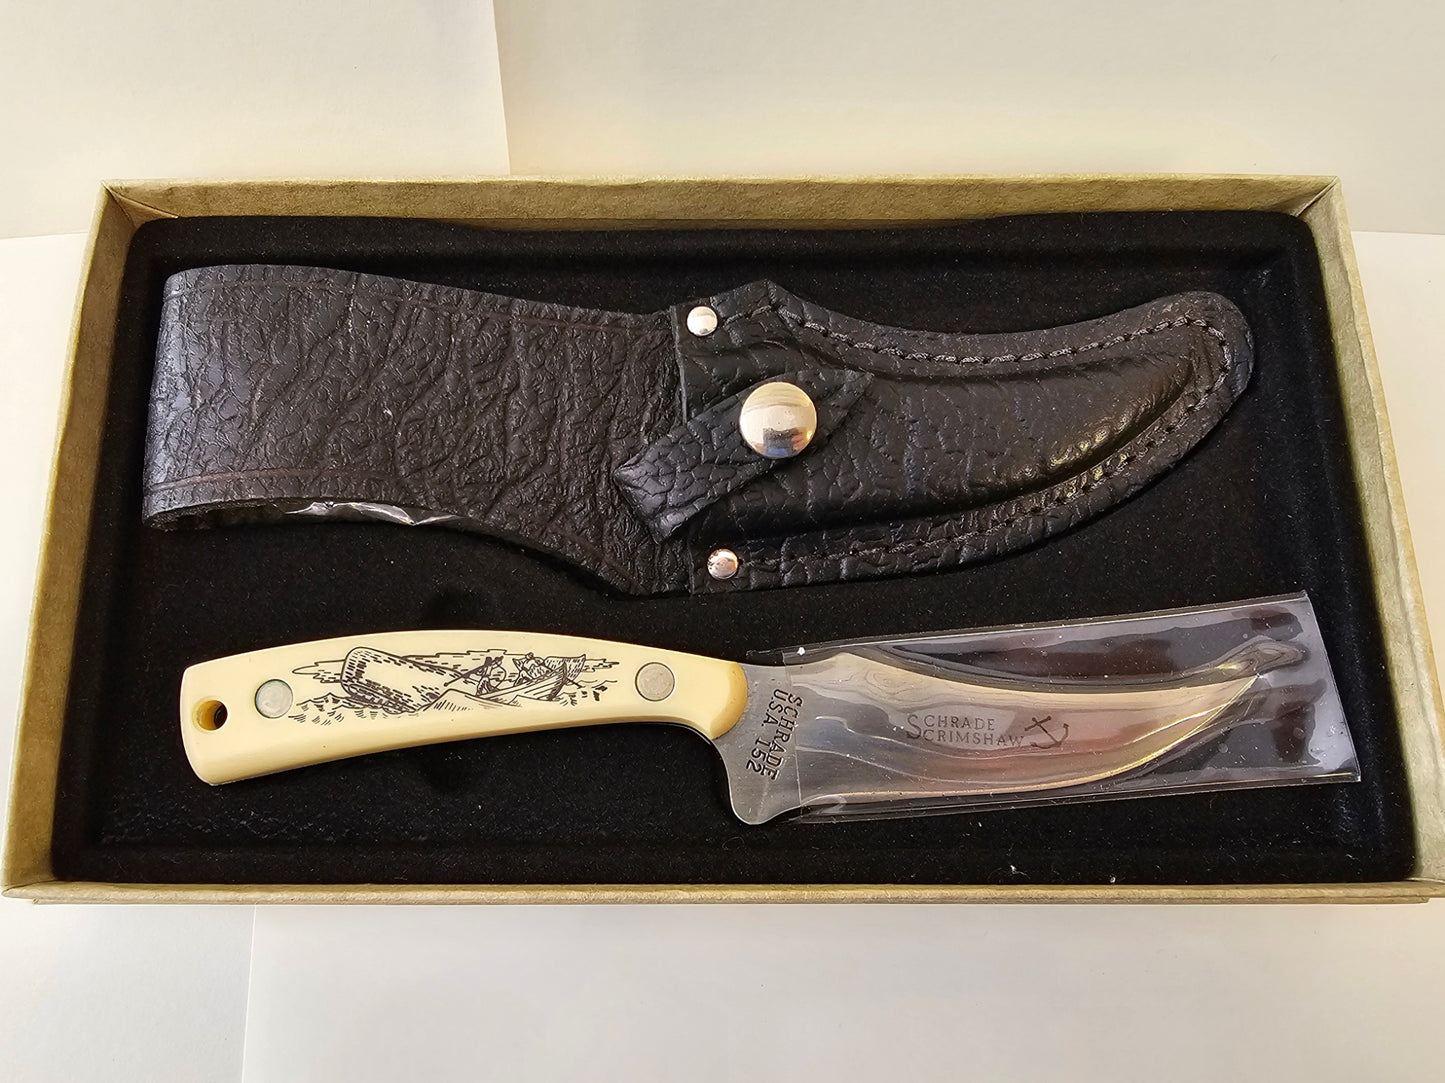 Vintage Schrade USA 1976 Scrimshaw Sharpfinger 152SC Knife Original Box and Papers - Never Sharpened, Carried or Cleaned MINT Untouched Condition